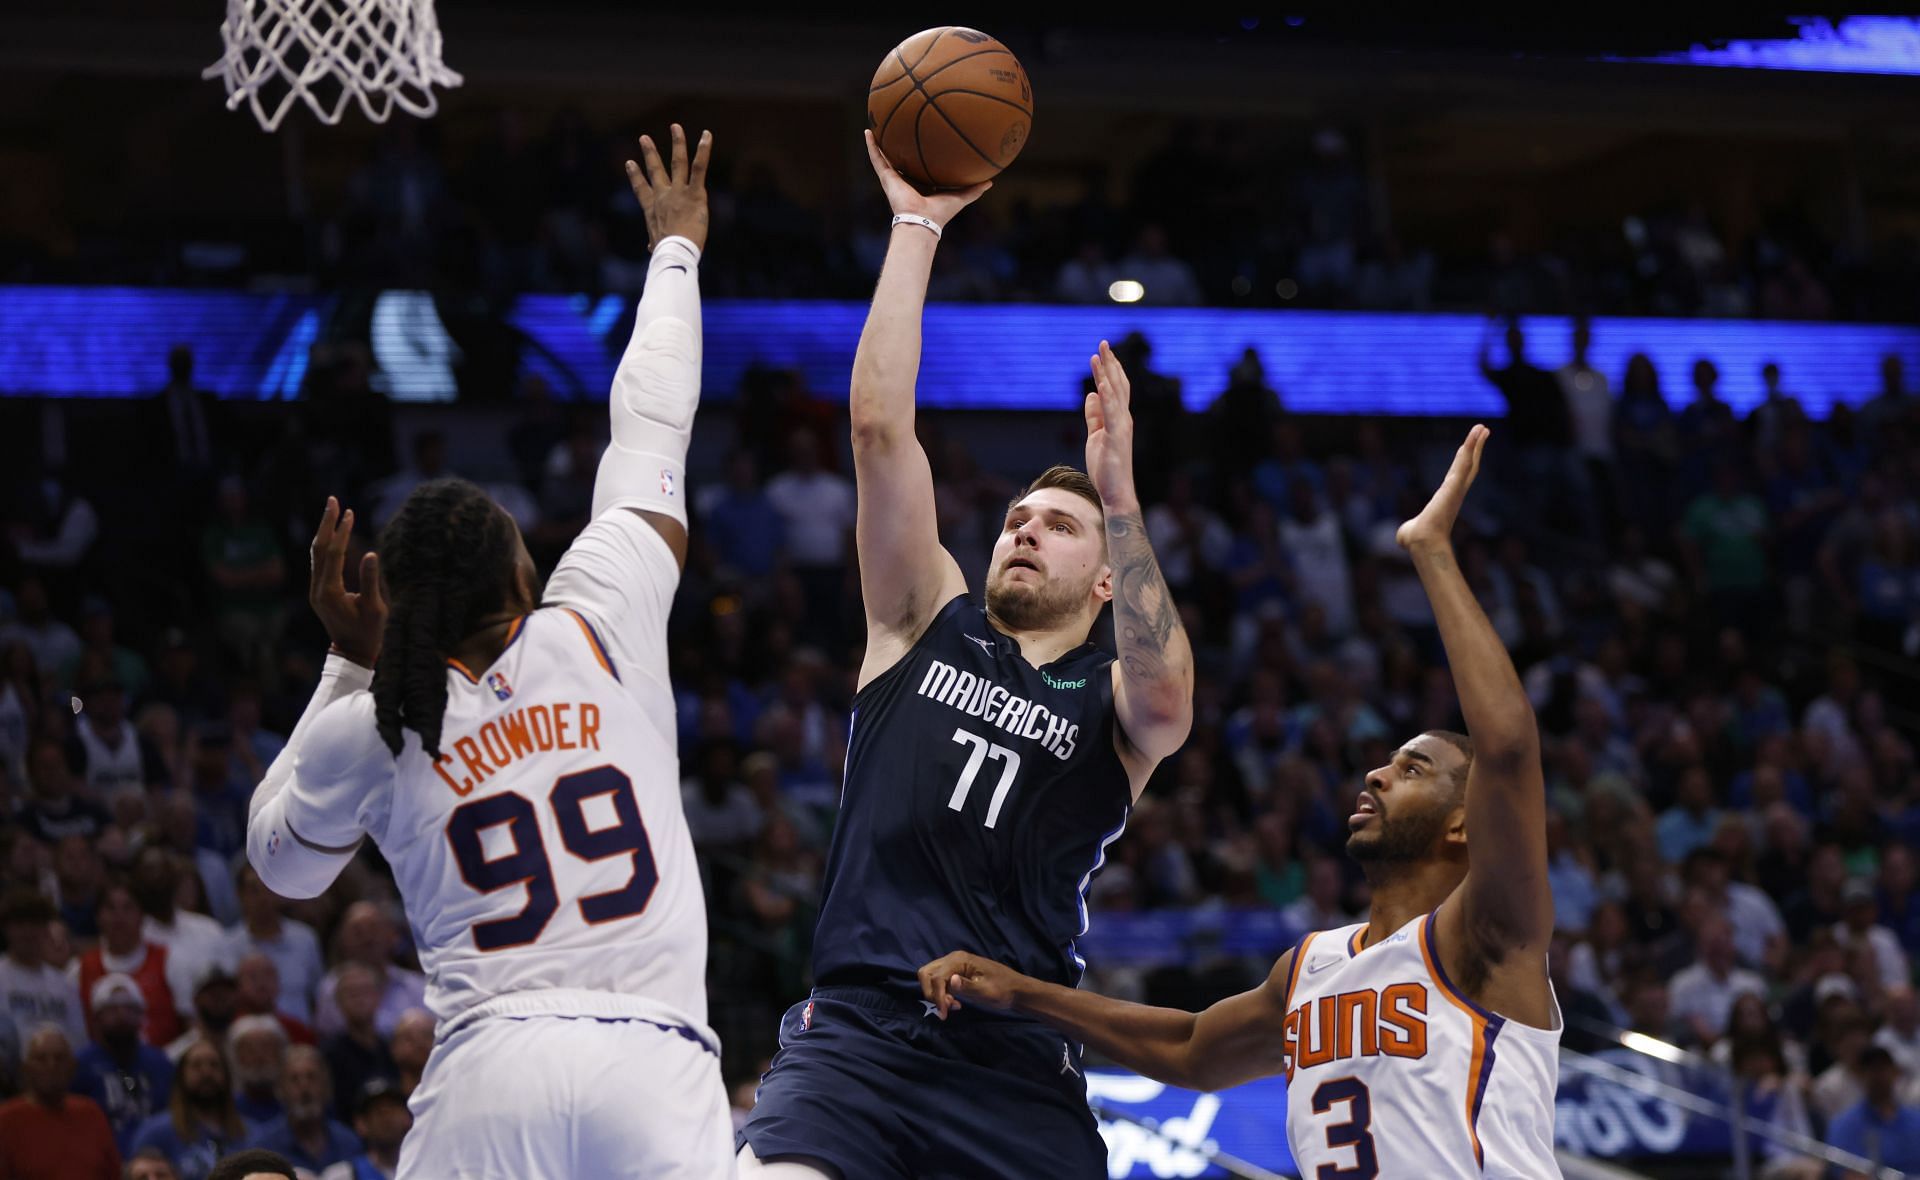 Luka Doncic #77 of the Dallas Mavericks shoots the ball against the Phoenix Suns